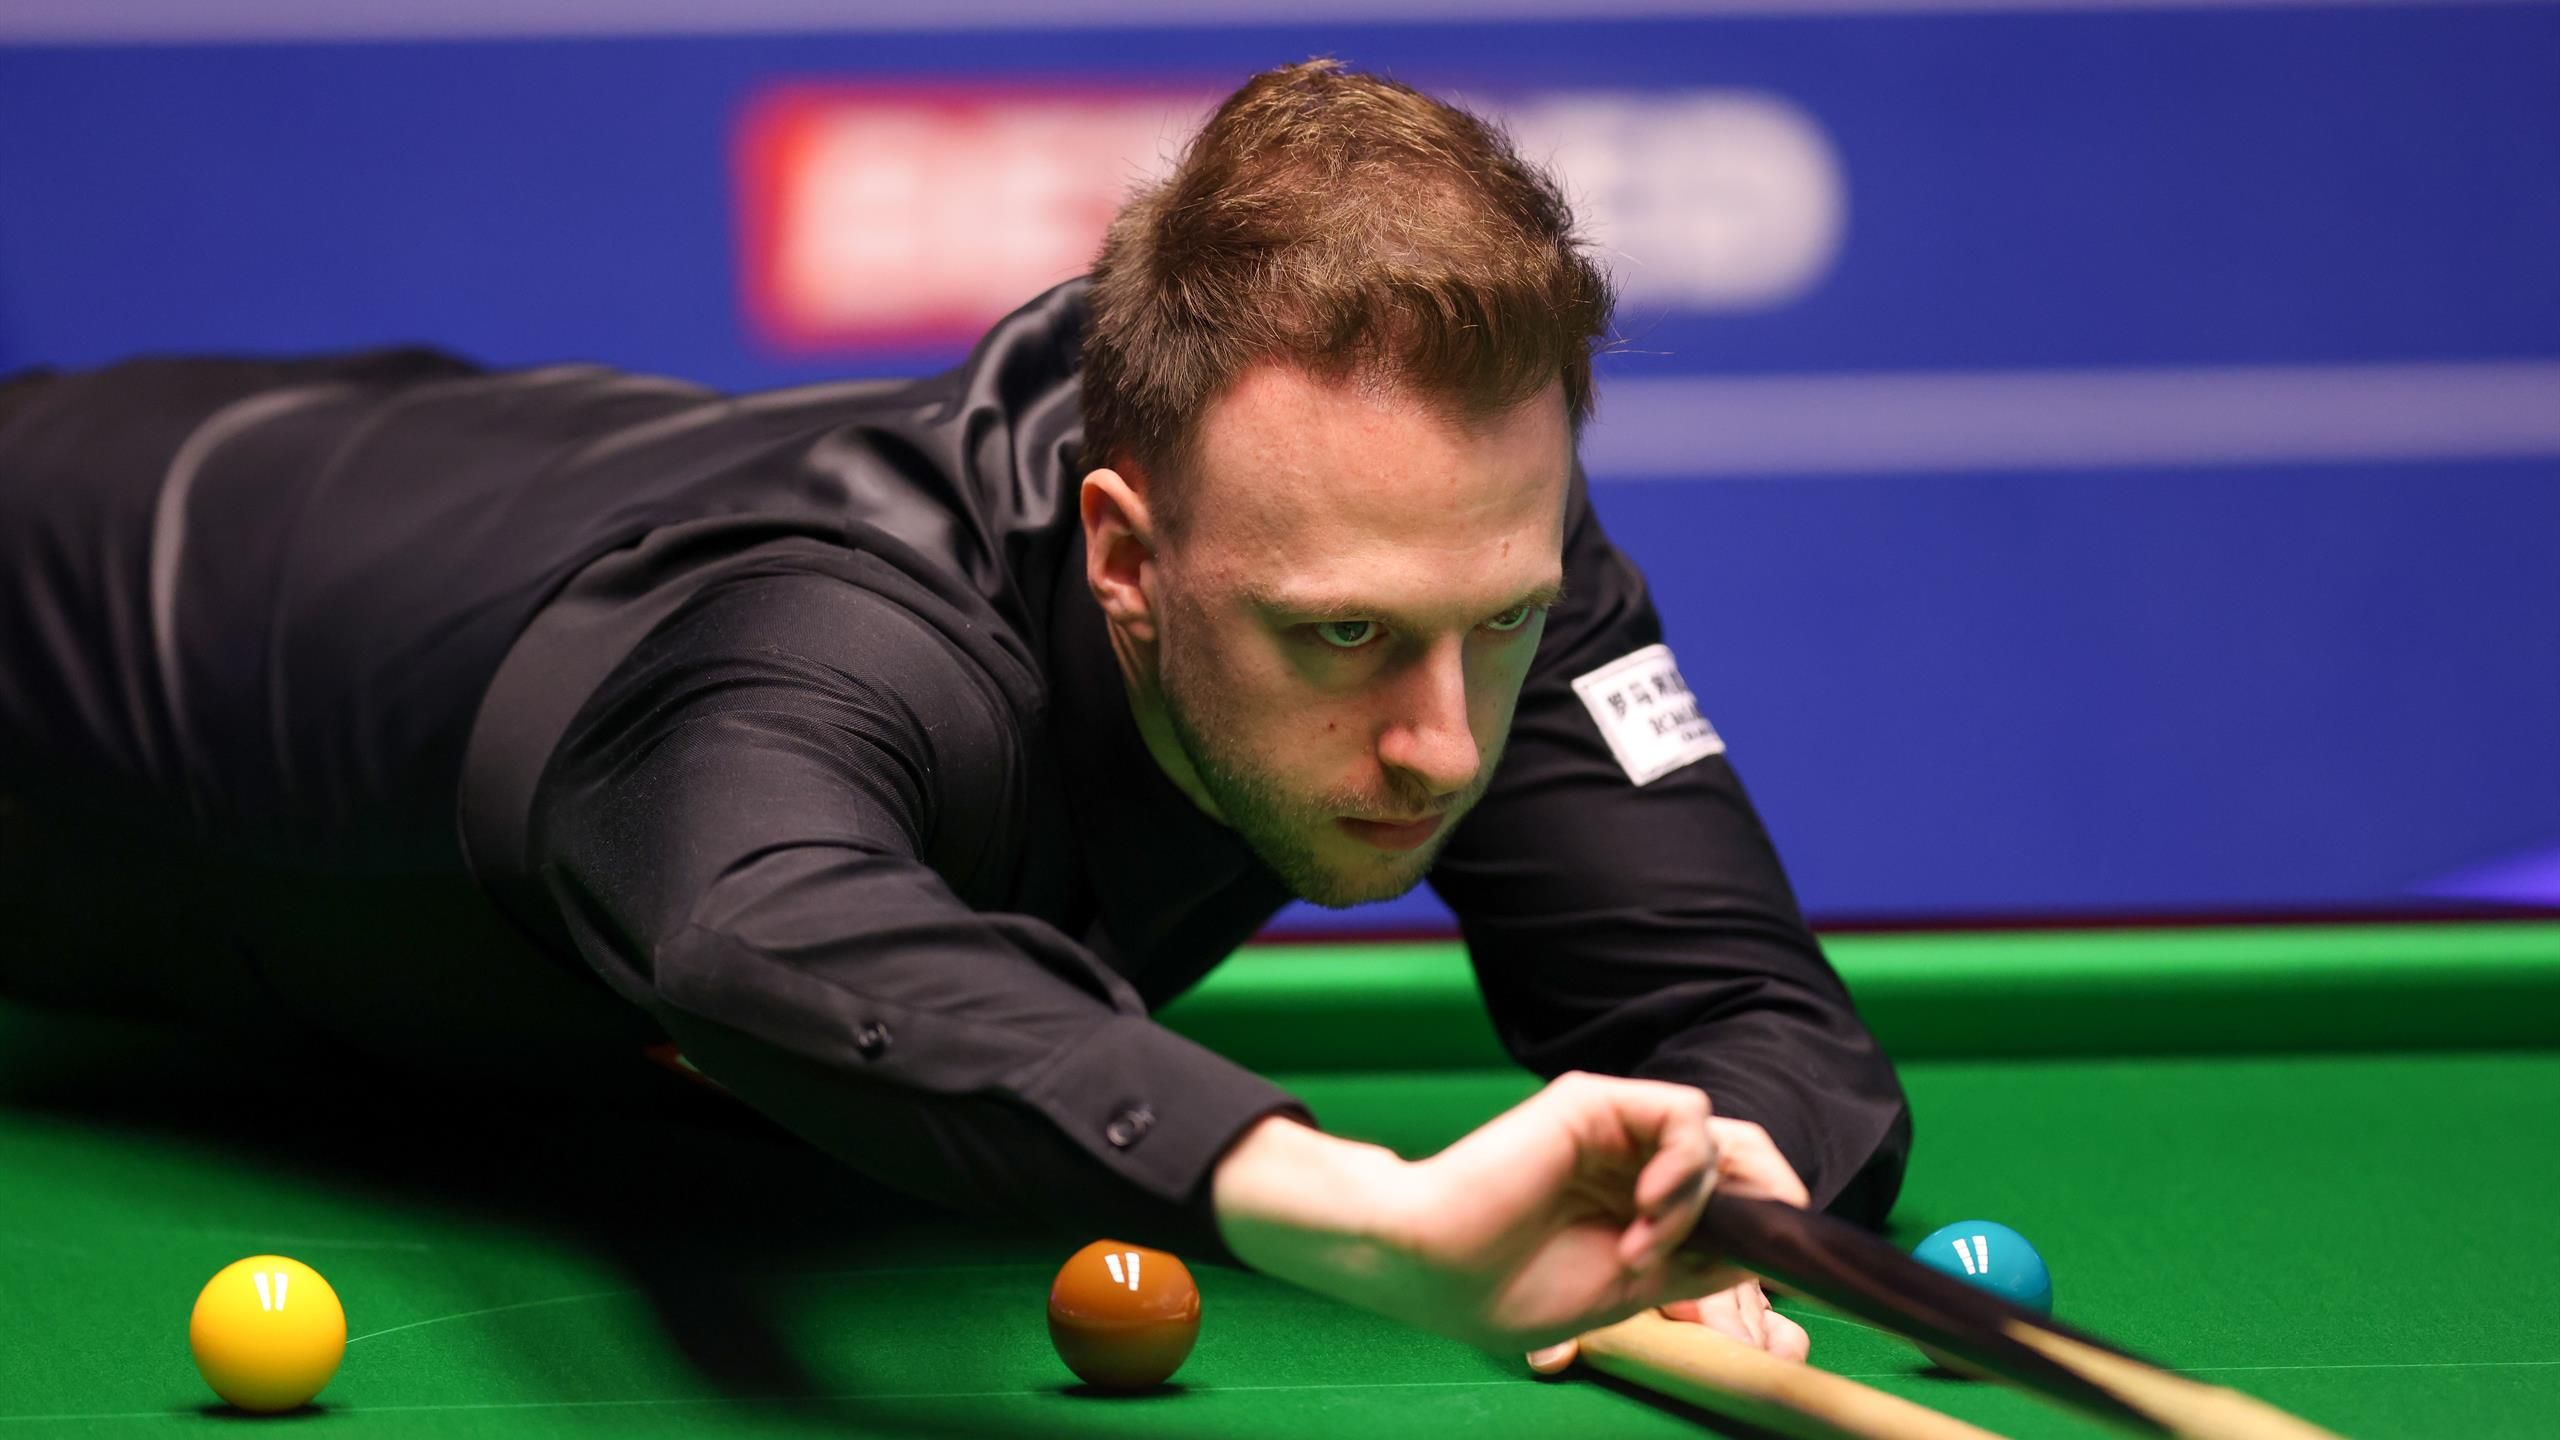 Gibraltar Open 2022 LIVE snooker updates - John Higgins in action after Ronnie OSullivan tumbles out